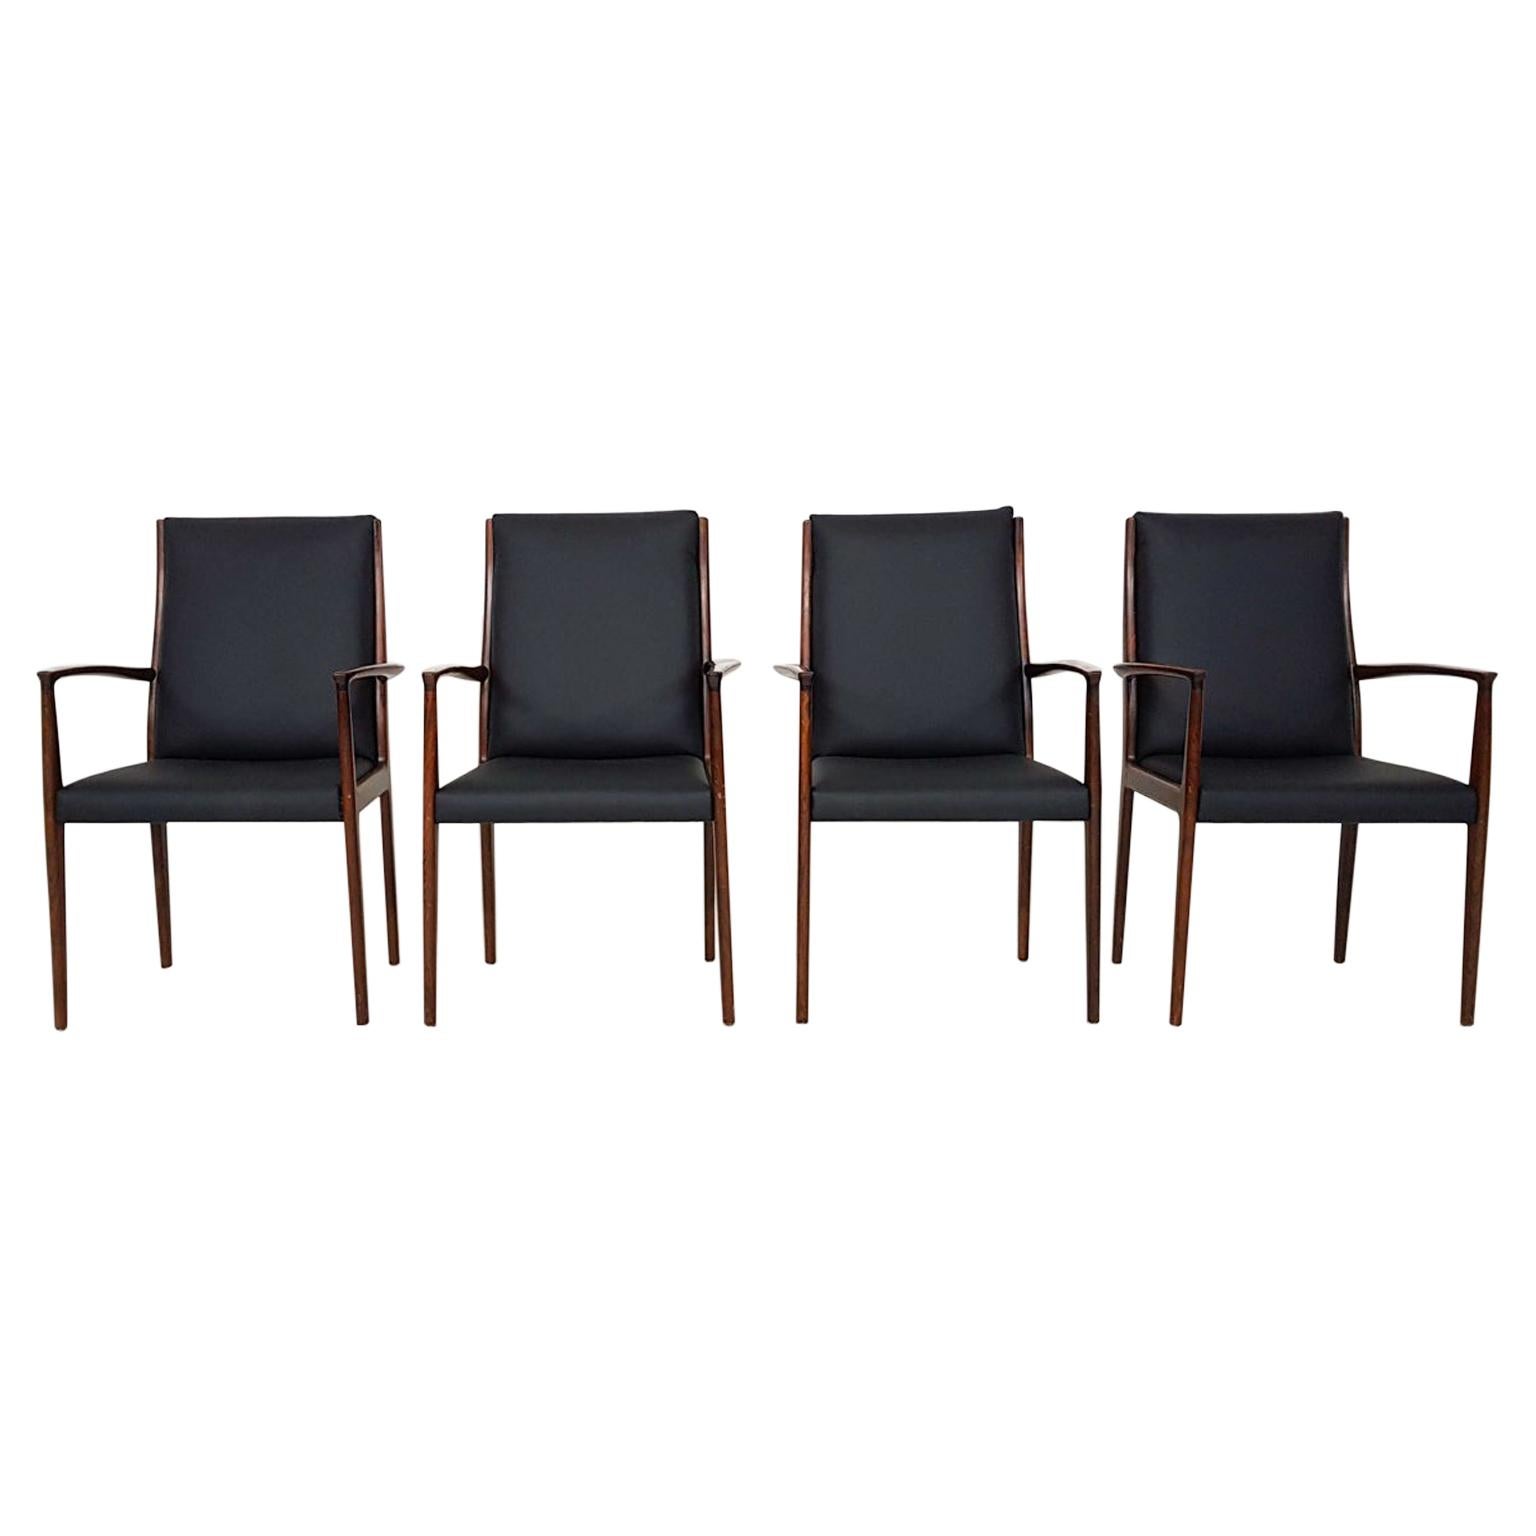 Set of 4 Rosewood and Black Leather Dining Chairs, Danish Modern, 1950s For Sale